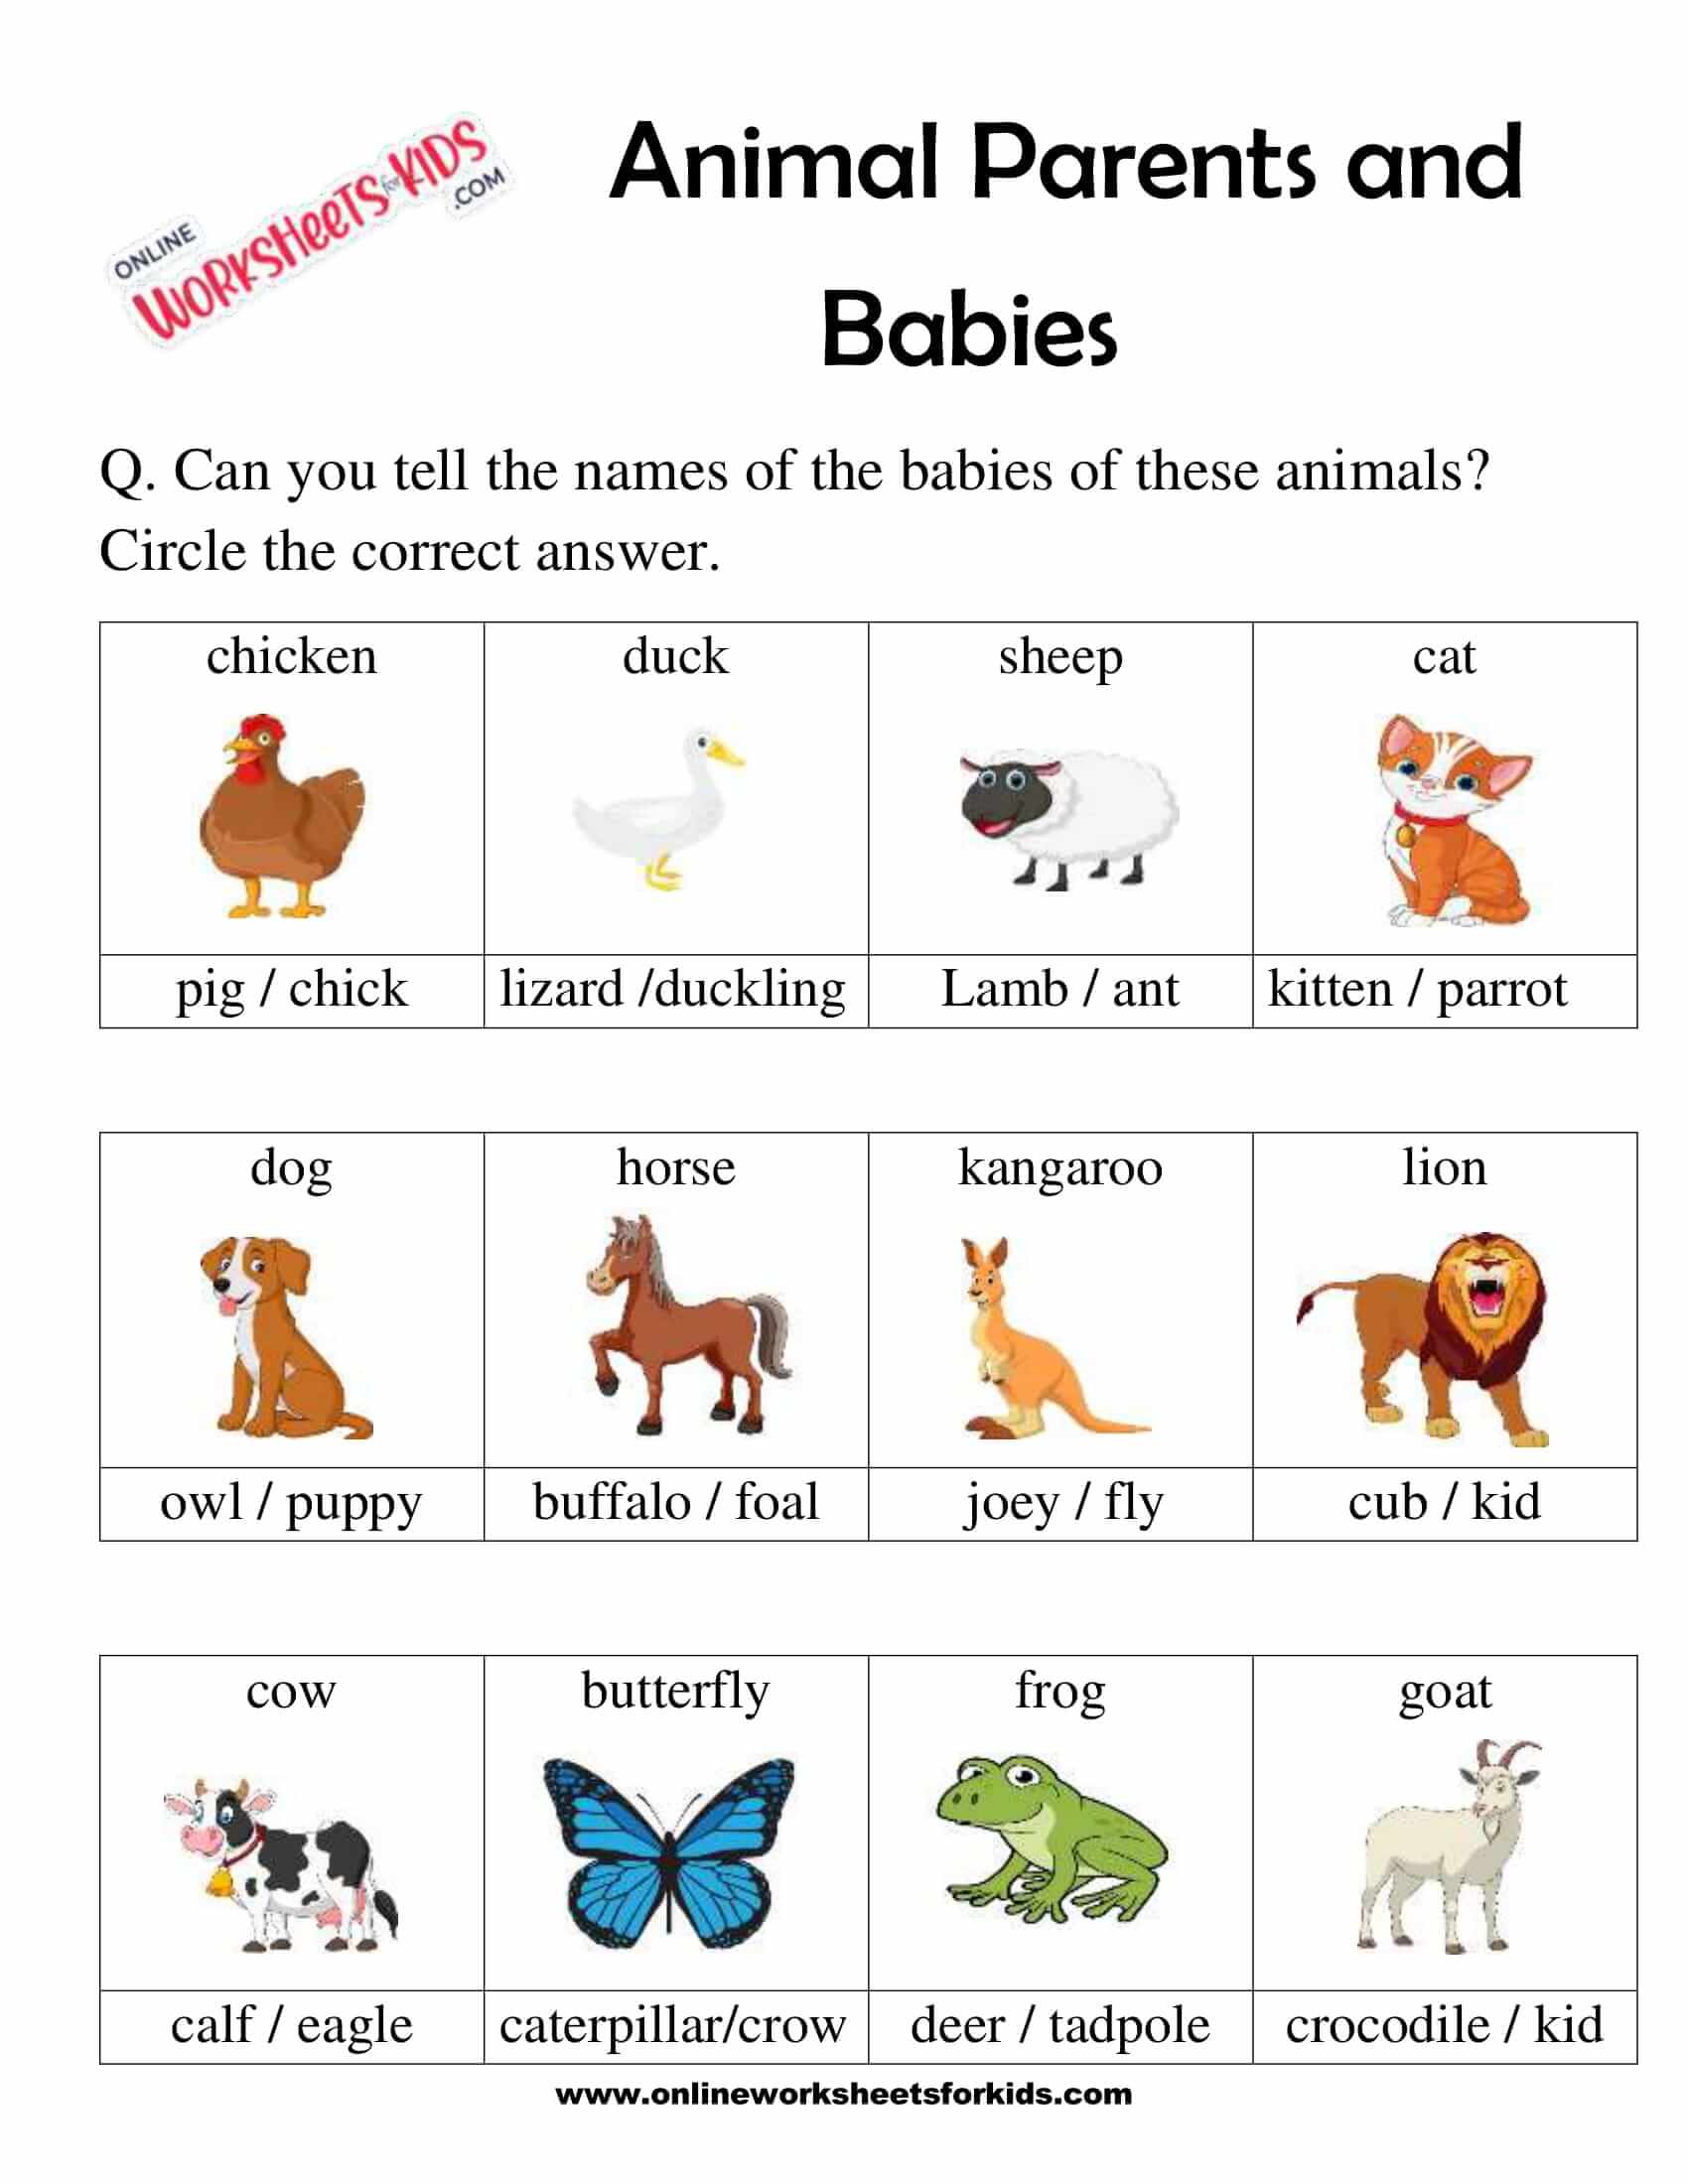 Animal Parents and Babies 4